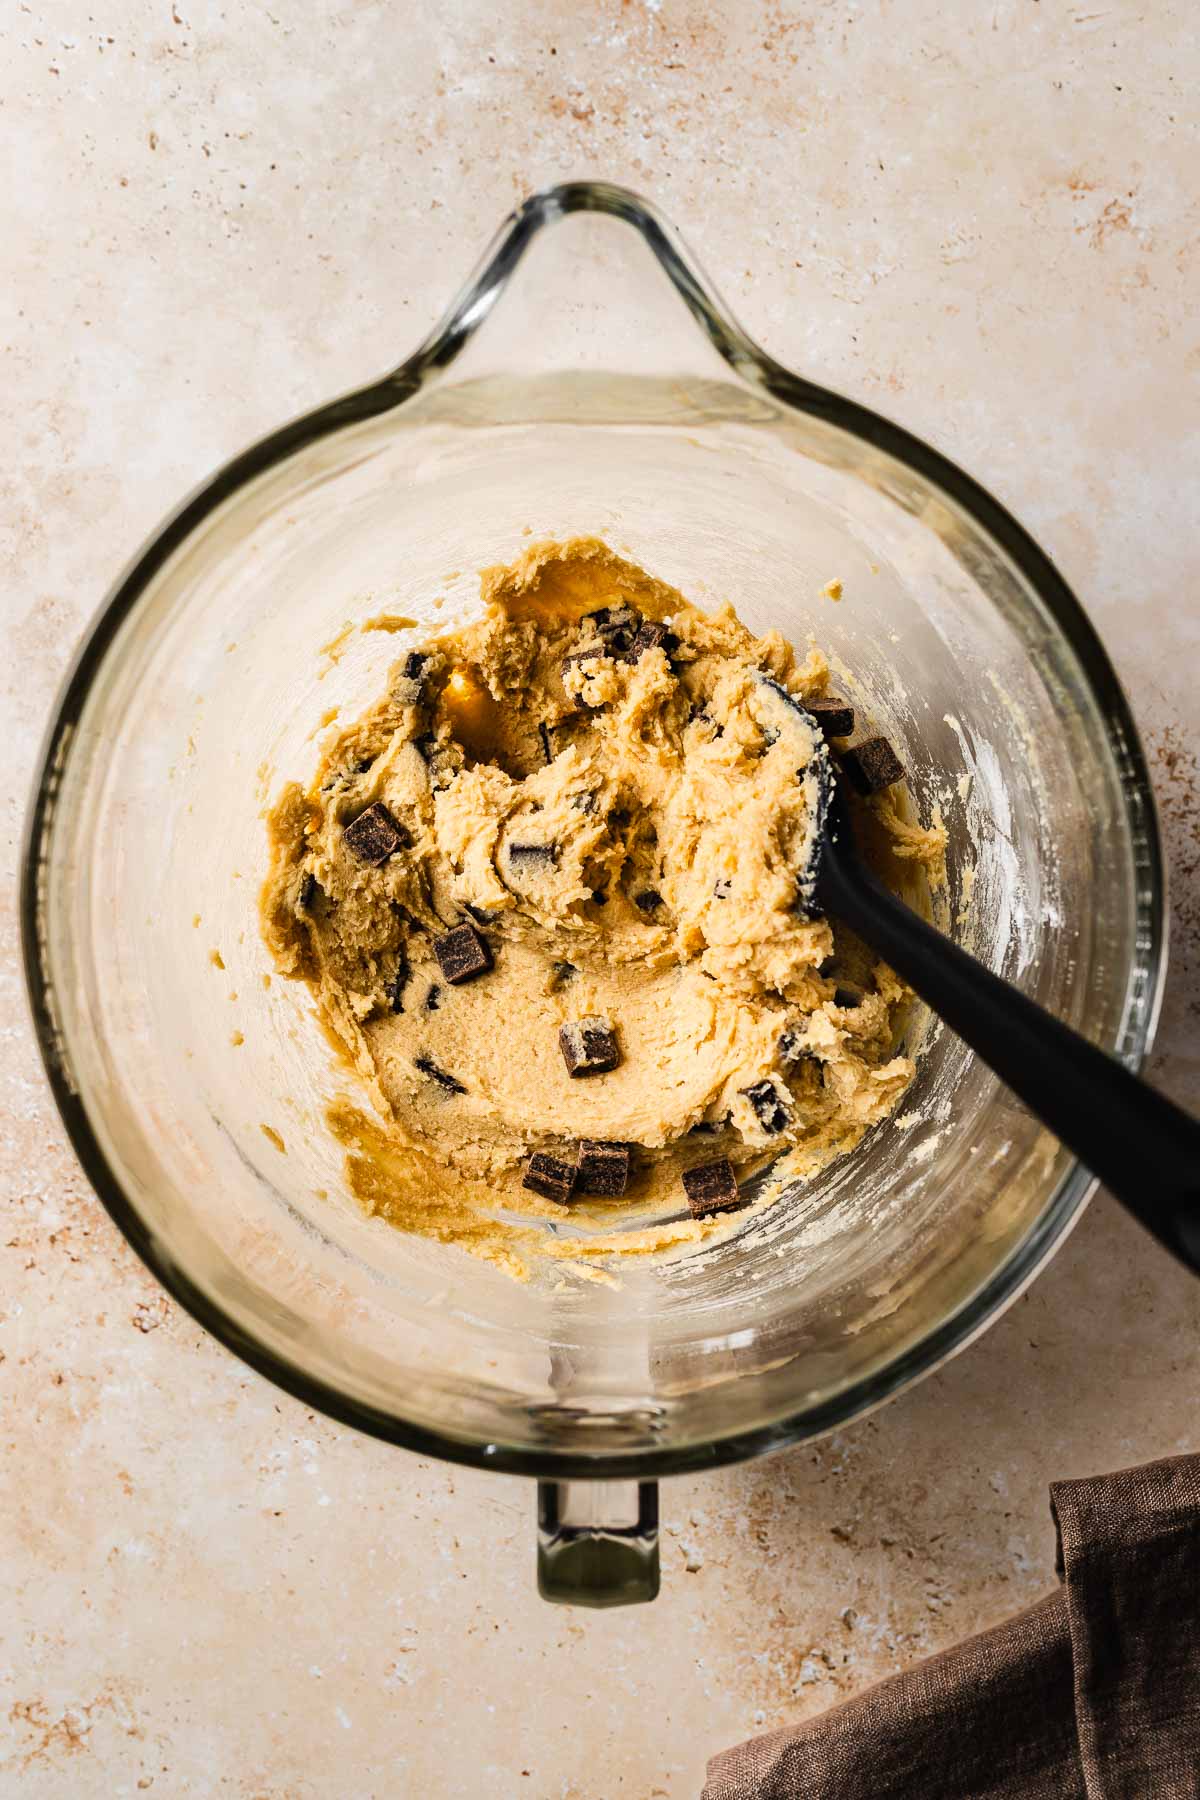 Finished eggless chocolate chip cookie dough in a glass mixing bowl.